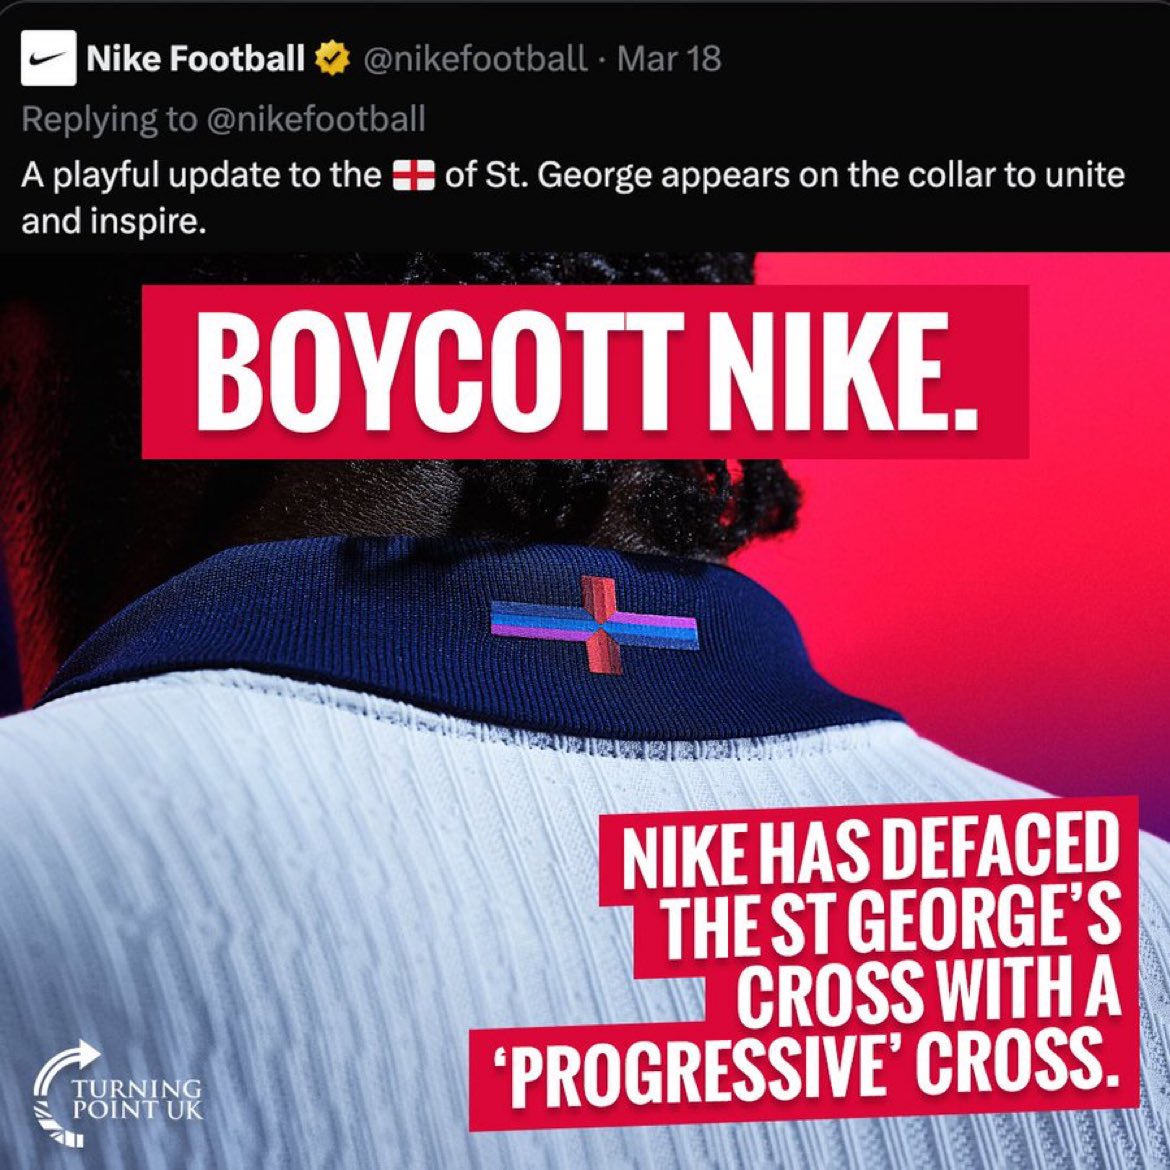 We are English and proud. 🏴󠁧󠁢󠁥󠁮󠁧󠁿 @nikefootball is a disgrace. If our flag offends you then leave. 🏴󠁧󠁢󠁥󠁮󠁧󠁿 #BoycottNike